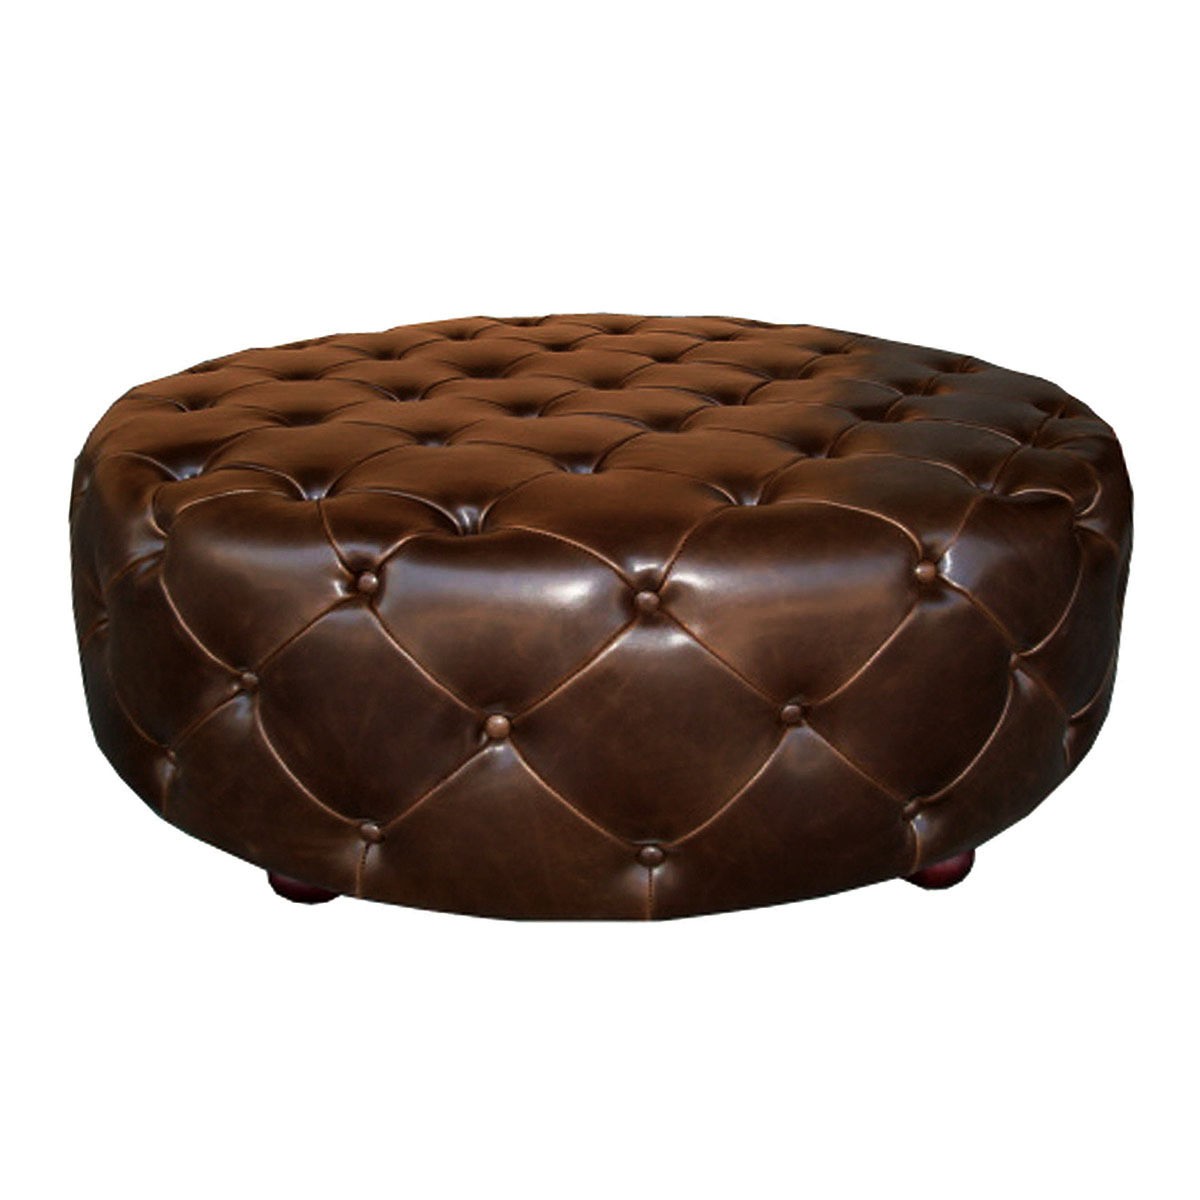 Soho tufted round ottoman brown leather zin home